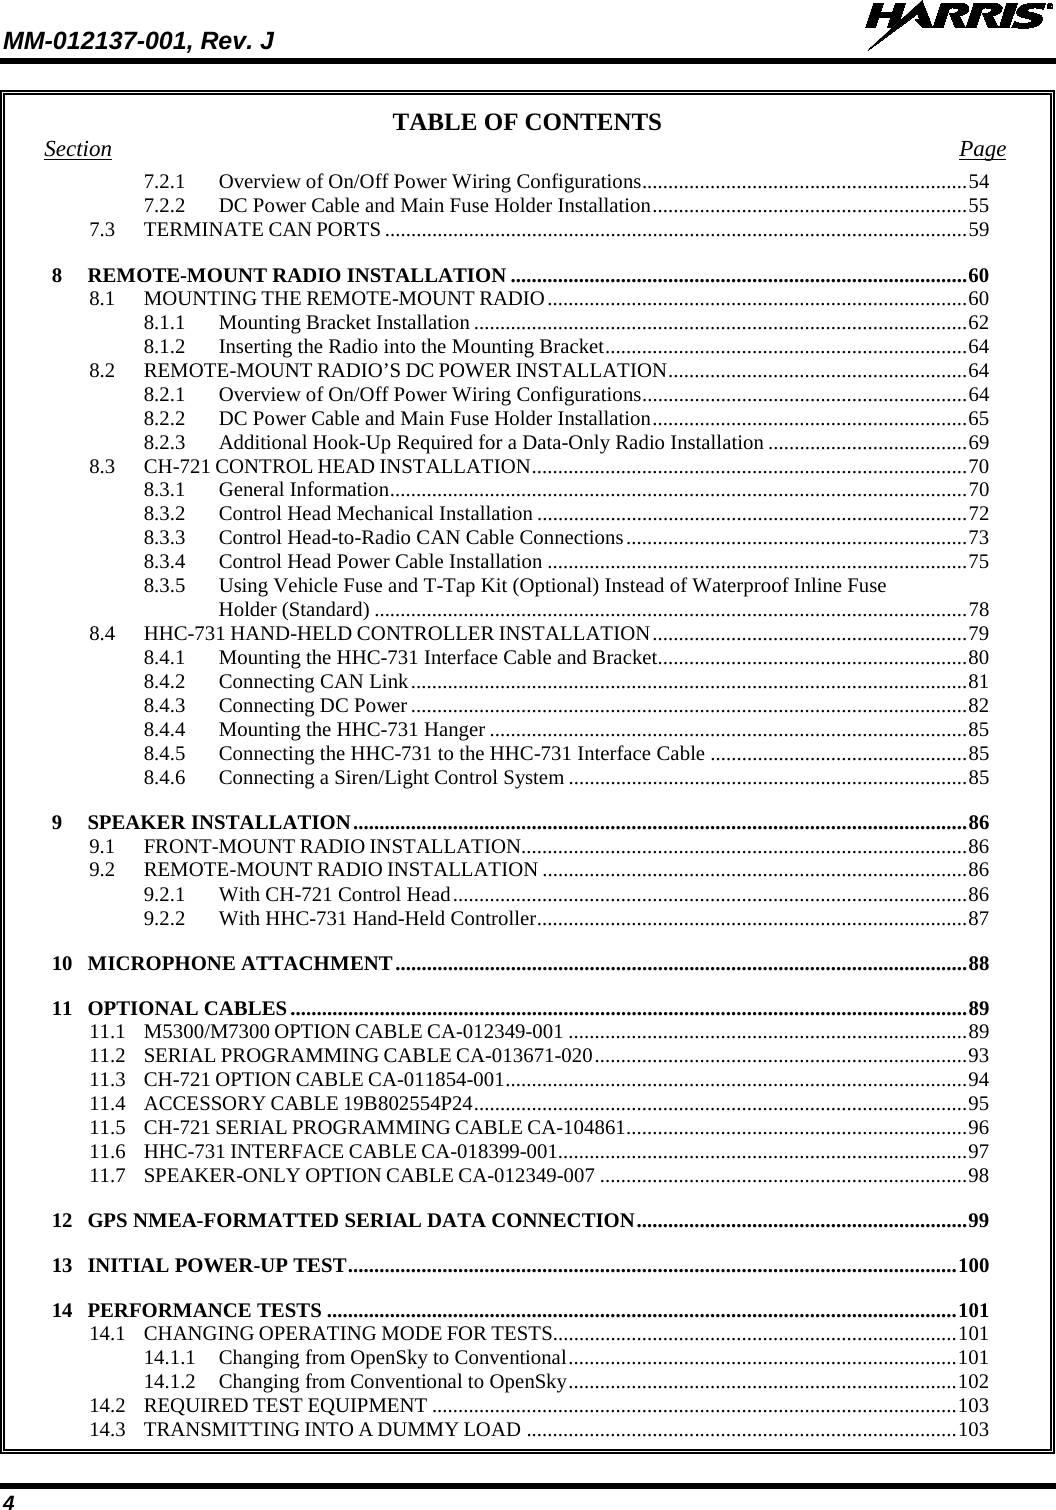 MM-012137-001, Rev. J   4 TABLE OF CONTENTS Section  Page 7.2.1 Overview of On/Off Power Wiring Configurations .............................................................. 54 7.2.2 DC Power Cable and Main Fuse Holder Installation ............................................................ 55 7.3 TERMINATE CAN PORTS ............................................................................................................... 59 8 REMOTE-MOUNT RADIO INSTALLATION ....................................................................................... 60 8.1 MOUNTING THE REMOTE-MOUNT RADIO ................................................................................ 60 8.1.1 Mounting Bracket Installation .............................................................................................. 62 8.1.2 Inserting the Radio into the Mounting Bracket ..................................................................... 64 8.2 REMOTE-MOUNT RADIO’S DC POWER INSTALLATION ......................................................... 64 8.2.1 Overview of On/Off Power Wiring Configurations .............................................................. 64 8.2.2 DC Power Cable and Main Fuse Holder Installation ............................................................ 65 8.2.3 Additional Hook-Up Required for a Data-Only Radio Installation ...................................... 69 8.3 CH-721 CONTROL HEAD INSTALLATION ................................................................................... 70 8.3.1 General Information .............................................................................................................. 70 8.3.2 Control Head Mechanical Installation .................................................................................. 72 8.3.3 Control Head-to-Radio CAN Cable Connections ................................................................. 73 8.3.4 Control Head Power Cable Installation ................................................................................ 75 8.3.5 Using Vehicle Fuse and T-Tap Kit (Optional) Instead of Waterproof Inline Fuse Holder (Standard) ................................................................................................................. 78 8.4 HHC-731 HAND-HELD CONTROLLER INSTALLATION ............................................................ 79 8.4.1 Mounting the HHC-731 Interface Cable and Bracket ........................................................... 80 8.4.2 Connecting CAN Link .......................................................................................................... 81 8.4.3 Connecting DC Power .......................................................................................................... 82 8.4.4 Mounting the HHC-731 Hanger ........................................................................................... 85 8.4.5 Connecting the HHC-731 to the HHC-731 Interface Cable ................................................. 85 8.4.6 Connecting a Siren/Light Control System ............................................................................ 85 9 SPEAKER INSTALLATION ..................................................................................................................... 86 9.1 FRONT-MOUNT RADIO INSTALLATION..................................................................................... 86 9.2 REMOTE-MOUNT RADIO INSTALLATION ................................................................................. 86 9.2.1 With CH-721 Control Head .................................................................................................. 86 9.2.2 With HHC-731 Hand-Held Controller .................................................................................. 87 10 MICROPHONE ATTACHMENT ............................................................................................................. 88 11 OPTIONAL CABLES ................................................................................................................................. 89 11.1 M5300/M7300 OPTION CABLE CA-012349-001 ............................................................................ 89 11.2 SERIAL PROGRAMMING CABLE CA-013671-020 ....................................................................... 93 11.3 CH-721 OPTION CABLE CA-011854-001 ........................................................................................ 94 11.4 ACCESSORY CABLE 19B802554P24 .............................................................................................. 95 11.5 CH-721 SERIAL PROGRAMMING CABLE CA-104861 ................................................................. 96 11.6 HHC-731 INTERFACE CABLE CA-018399-001.............................................................................. 97 11.7 SPEAKER-ONLY OPTION CABLE CA-012349-007 ...................................................................... 98 12 GPS NMEA-FORMATTED SERIAL DATA CONNECTION ............................................................... 99 13 INITIAL POWER-UP TEST .................................................................................................................... 100 14 PERFORMANCE TESTS ........................................................................................................................ 101 14.1 CHANGING OPERATING MODE FOR TESTS............................................................................. 101 14.1.1 Changing from OpenSky to Conventional .......................................................................... 101 14.1.2 Changing from Conventional to OpenSky .......................................................................... 102 14.2 REQUIRED TEST EQUIPMENT .................................................................................................... 103 14.3 TRANSMITTING INTO A DUMMY LOAD .................................................................................. 103 